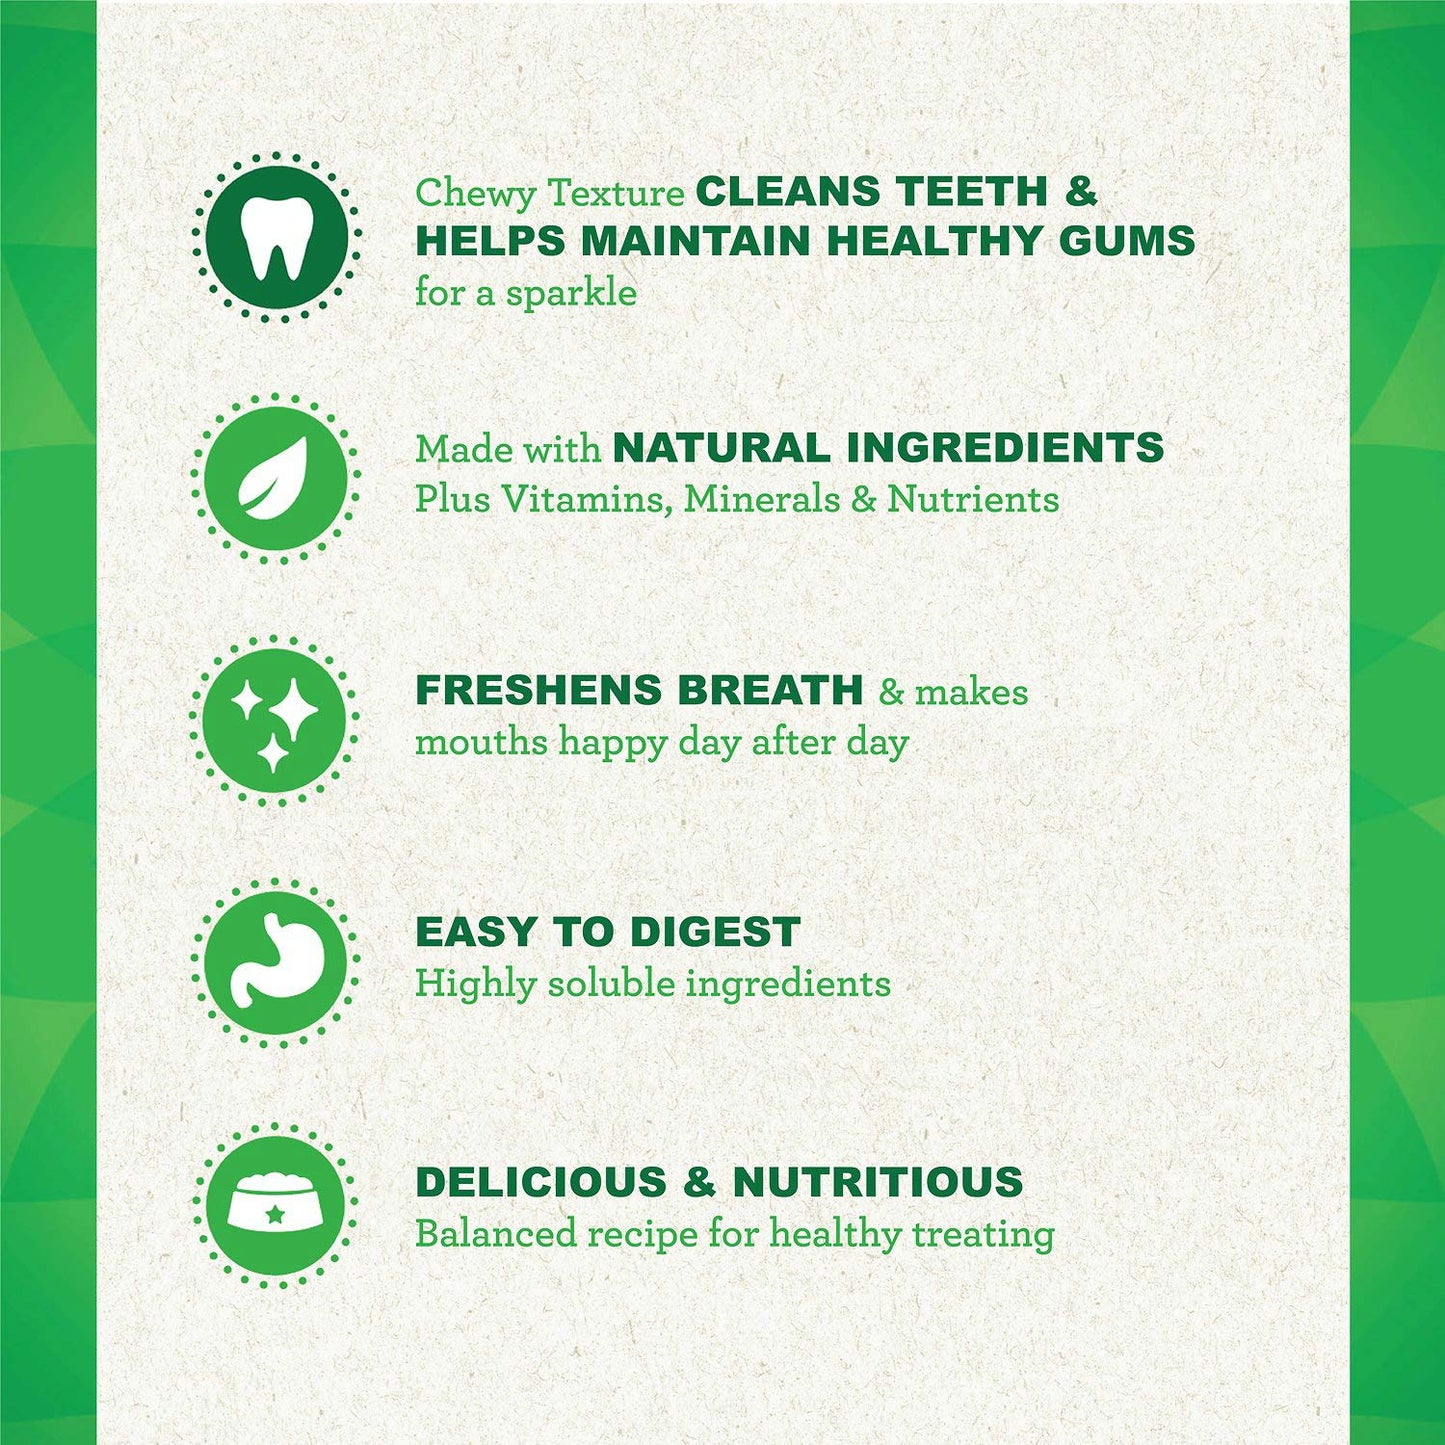 Greenies Dental Chews for Dogs, Regular, 36 Count (Pack of 5)